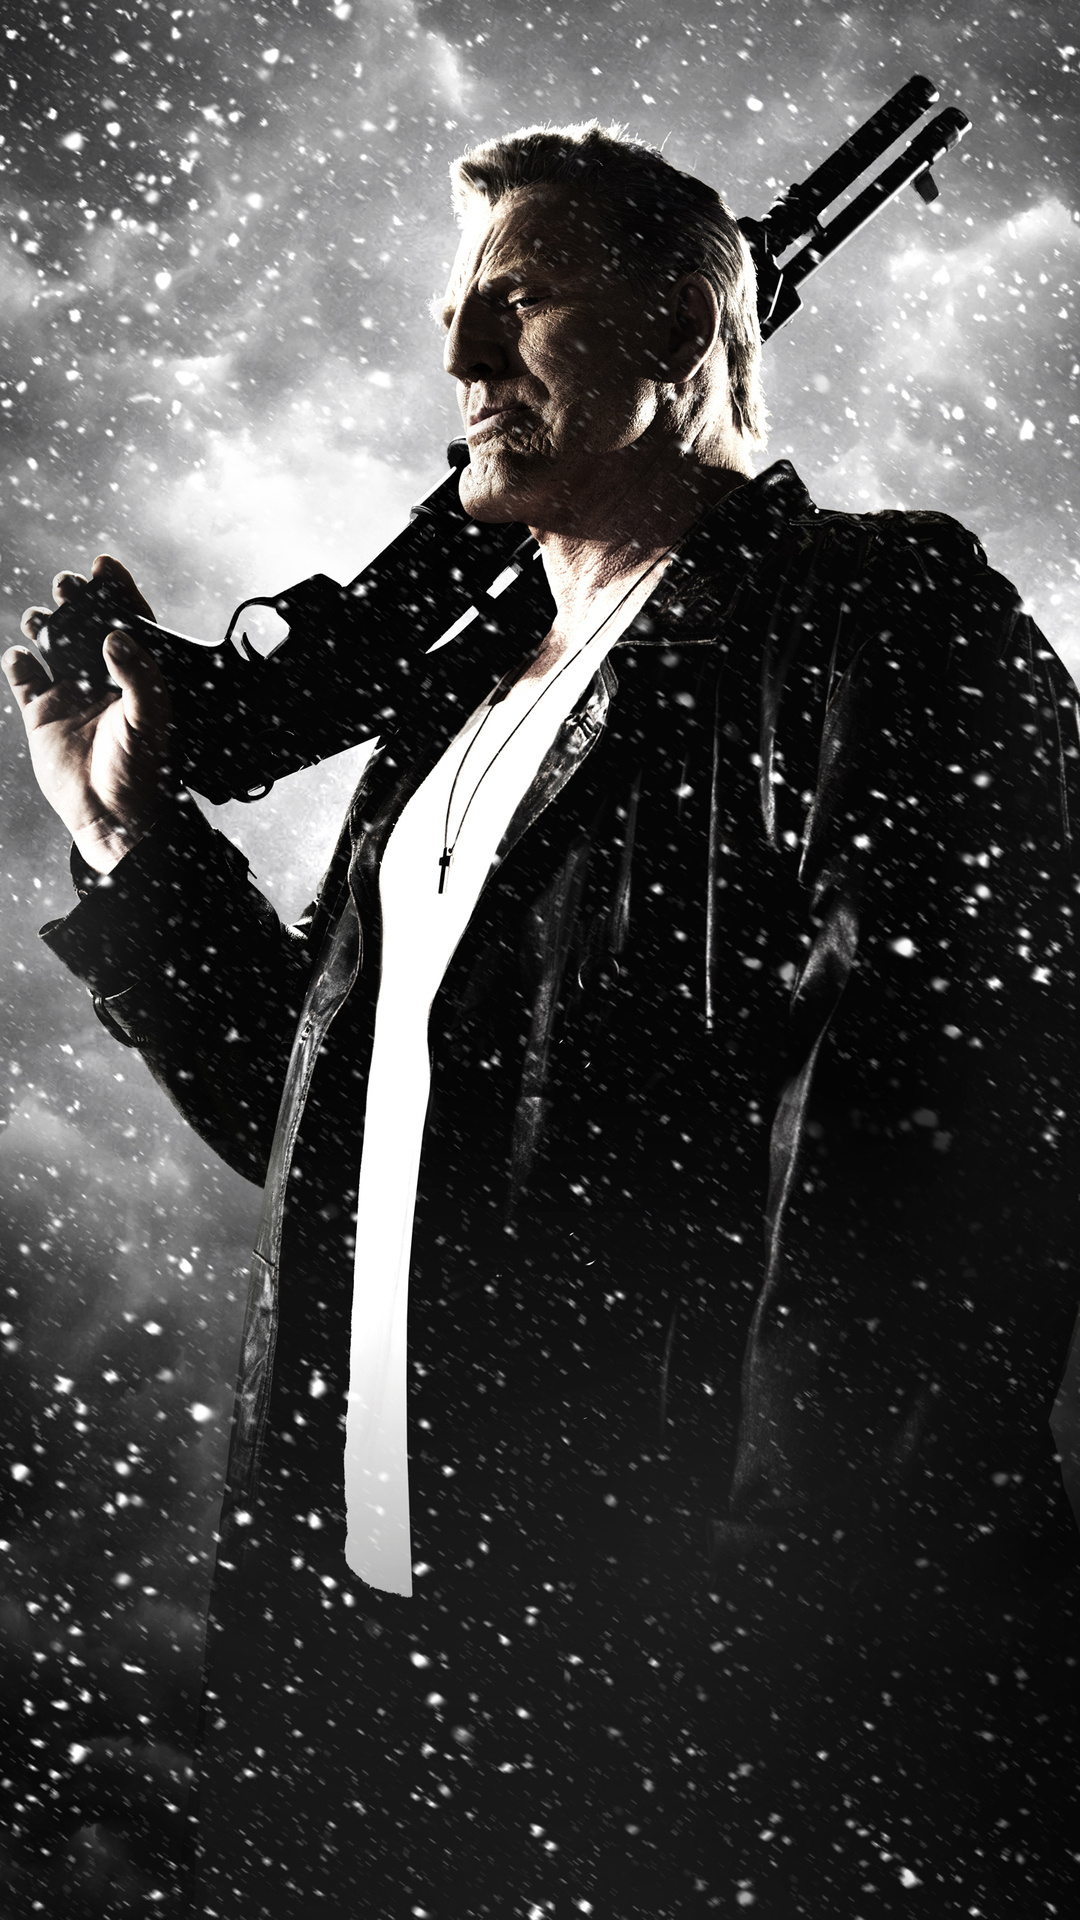 Sin City: One of the major characters of the series, Played by Mickey Rourke. 1080x1920 Full HD Wallpaper.